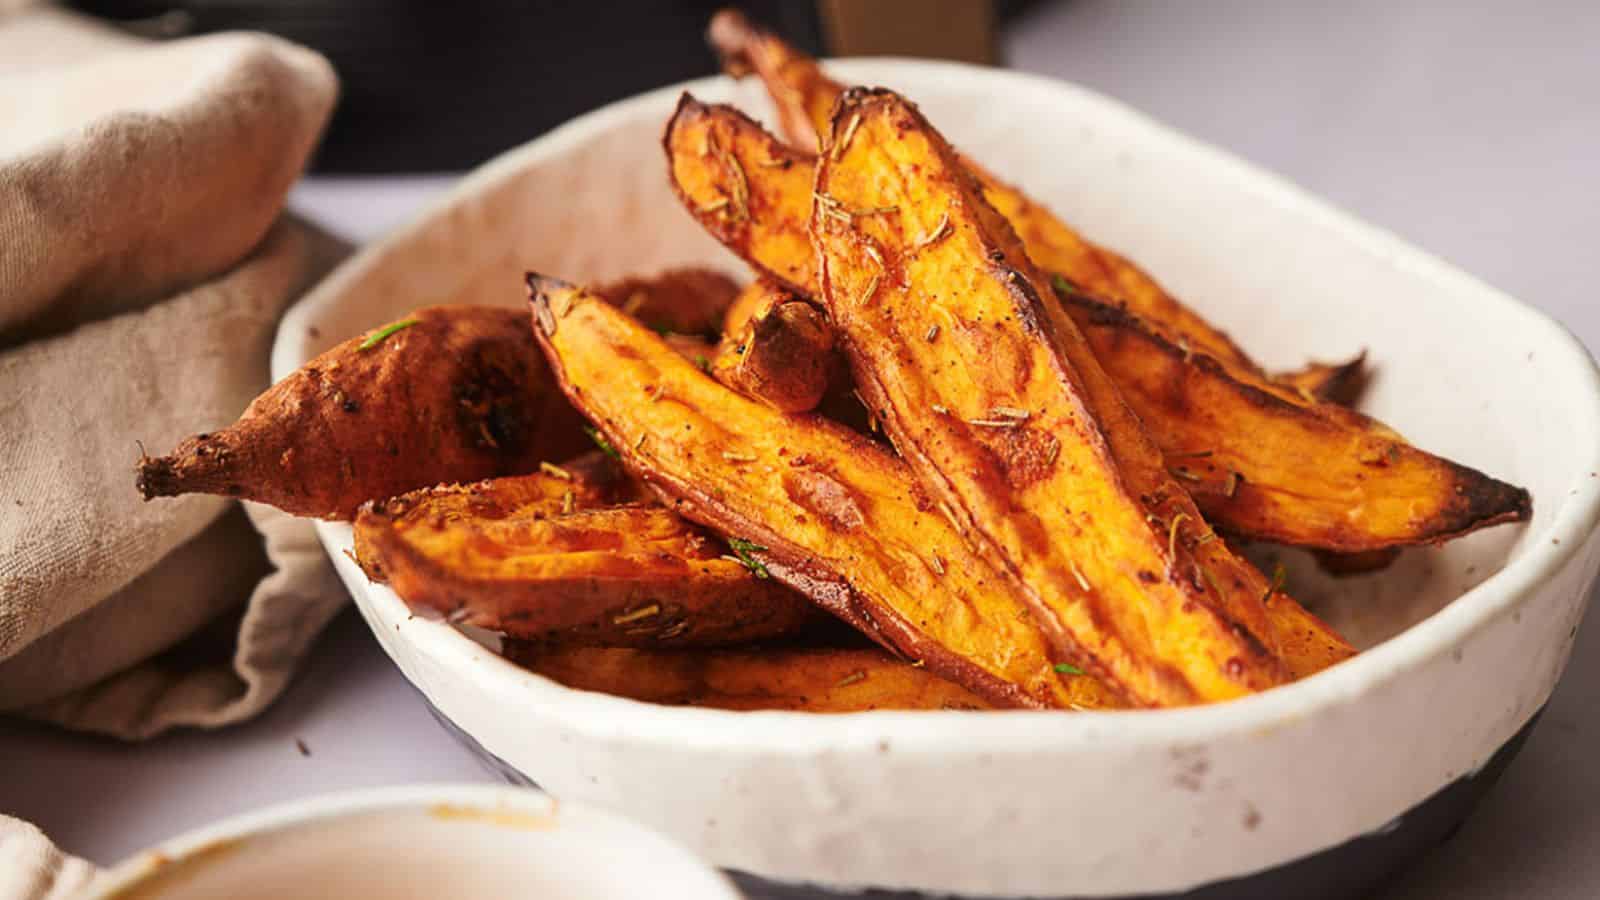 <p>Sweet potato wedges from the air fryer are crisp and satisfying. An affordable and delicious choice. Serve them with your favorite dip for an extra treat.<br><strong>Get the Recipe: </strong><a href="https://www.splashoftaste.com/air-fryer-sweet-potato-wedges/?utm_source=msn&utm_medium=page&utm_campaign=msn">Air Fryer Sweet Potato Wedges</a></p>